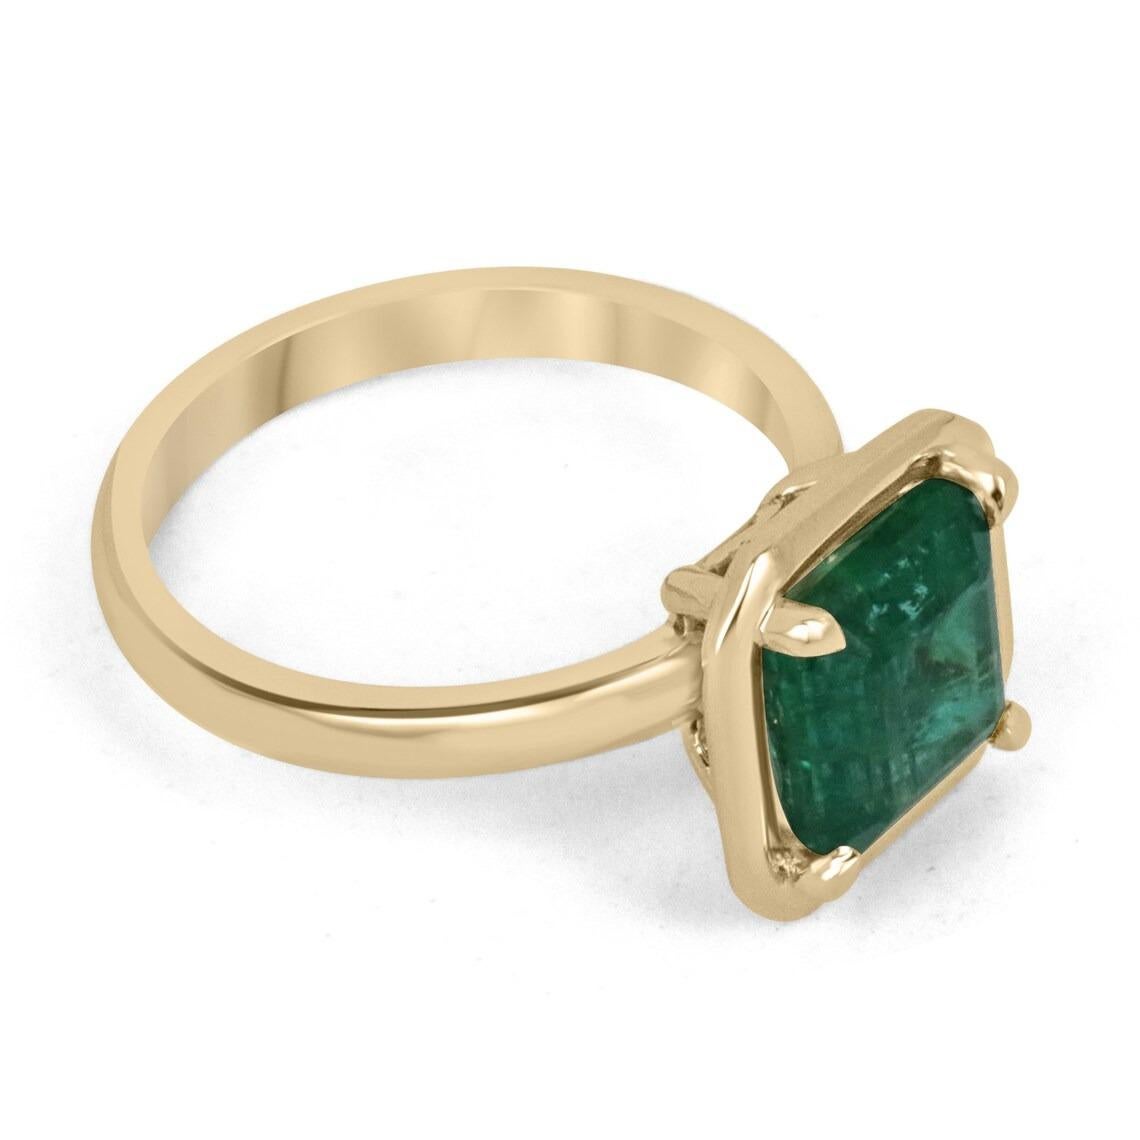 Displayed is a classic emerald solitaire Asscher-cut engagement ring/right-hand ring in 14K yellow gold. This gorgeous solitaire ring carries a full 3.25-carat emerald in a four-prong setting. Fully faceted, this gemstone showcases excellent shine.